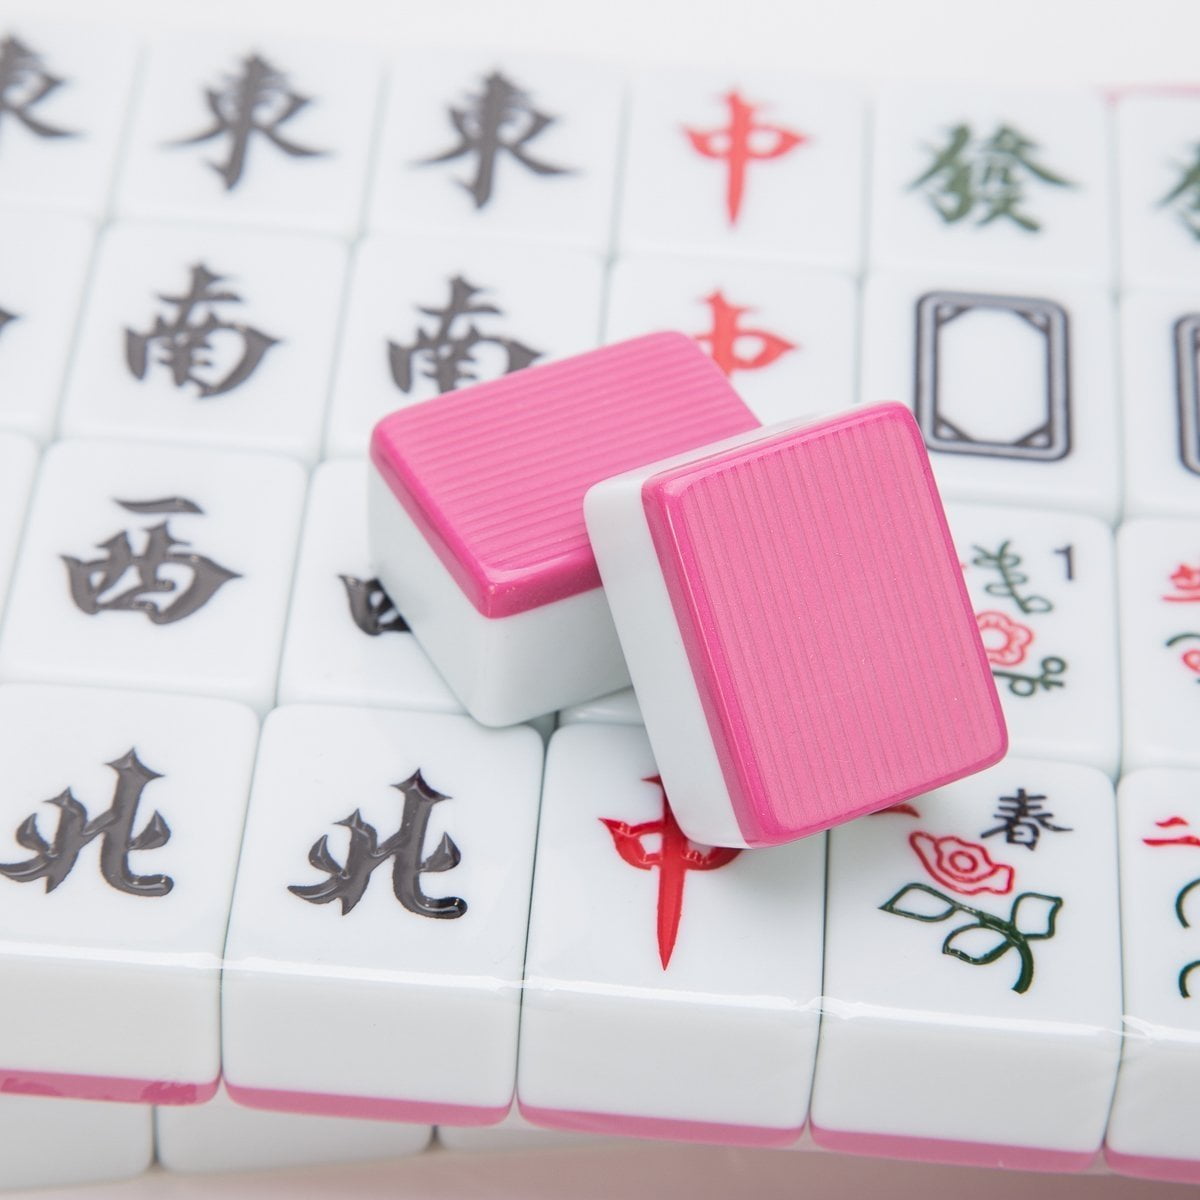 Pink Family Games Mahjong Set Full Size Tournament Table Professional 40mm  Travel Chinese Mahjong Giochi Da Tavolo Party Game